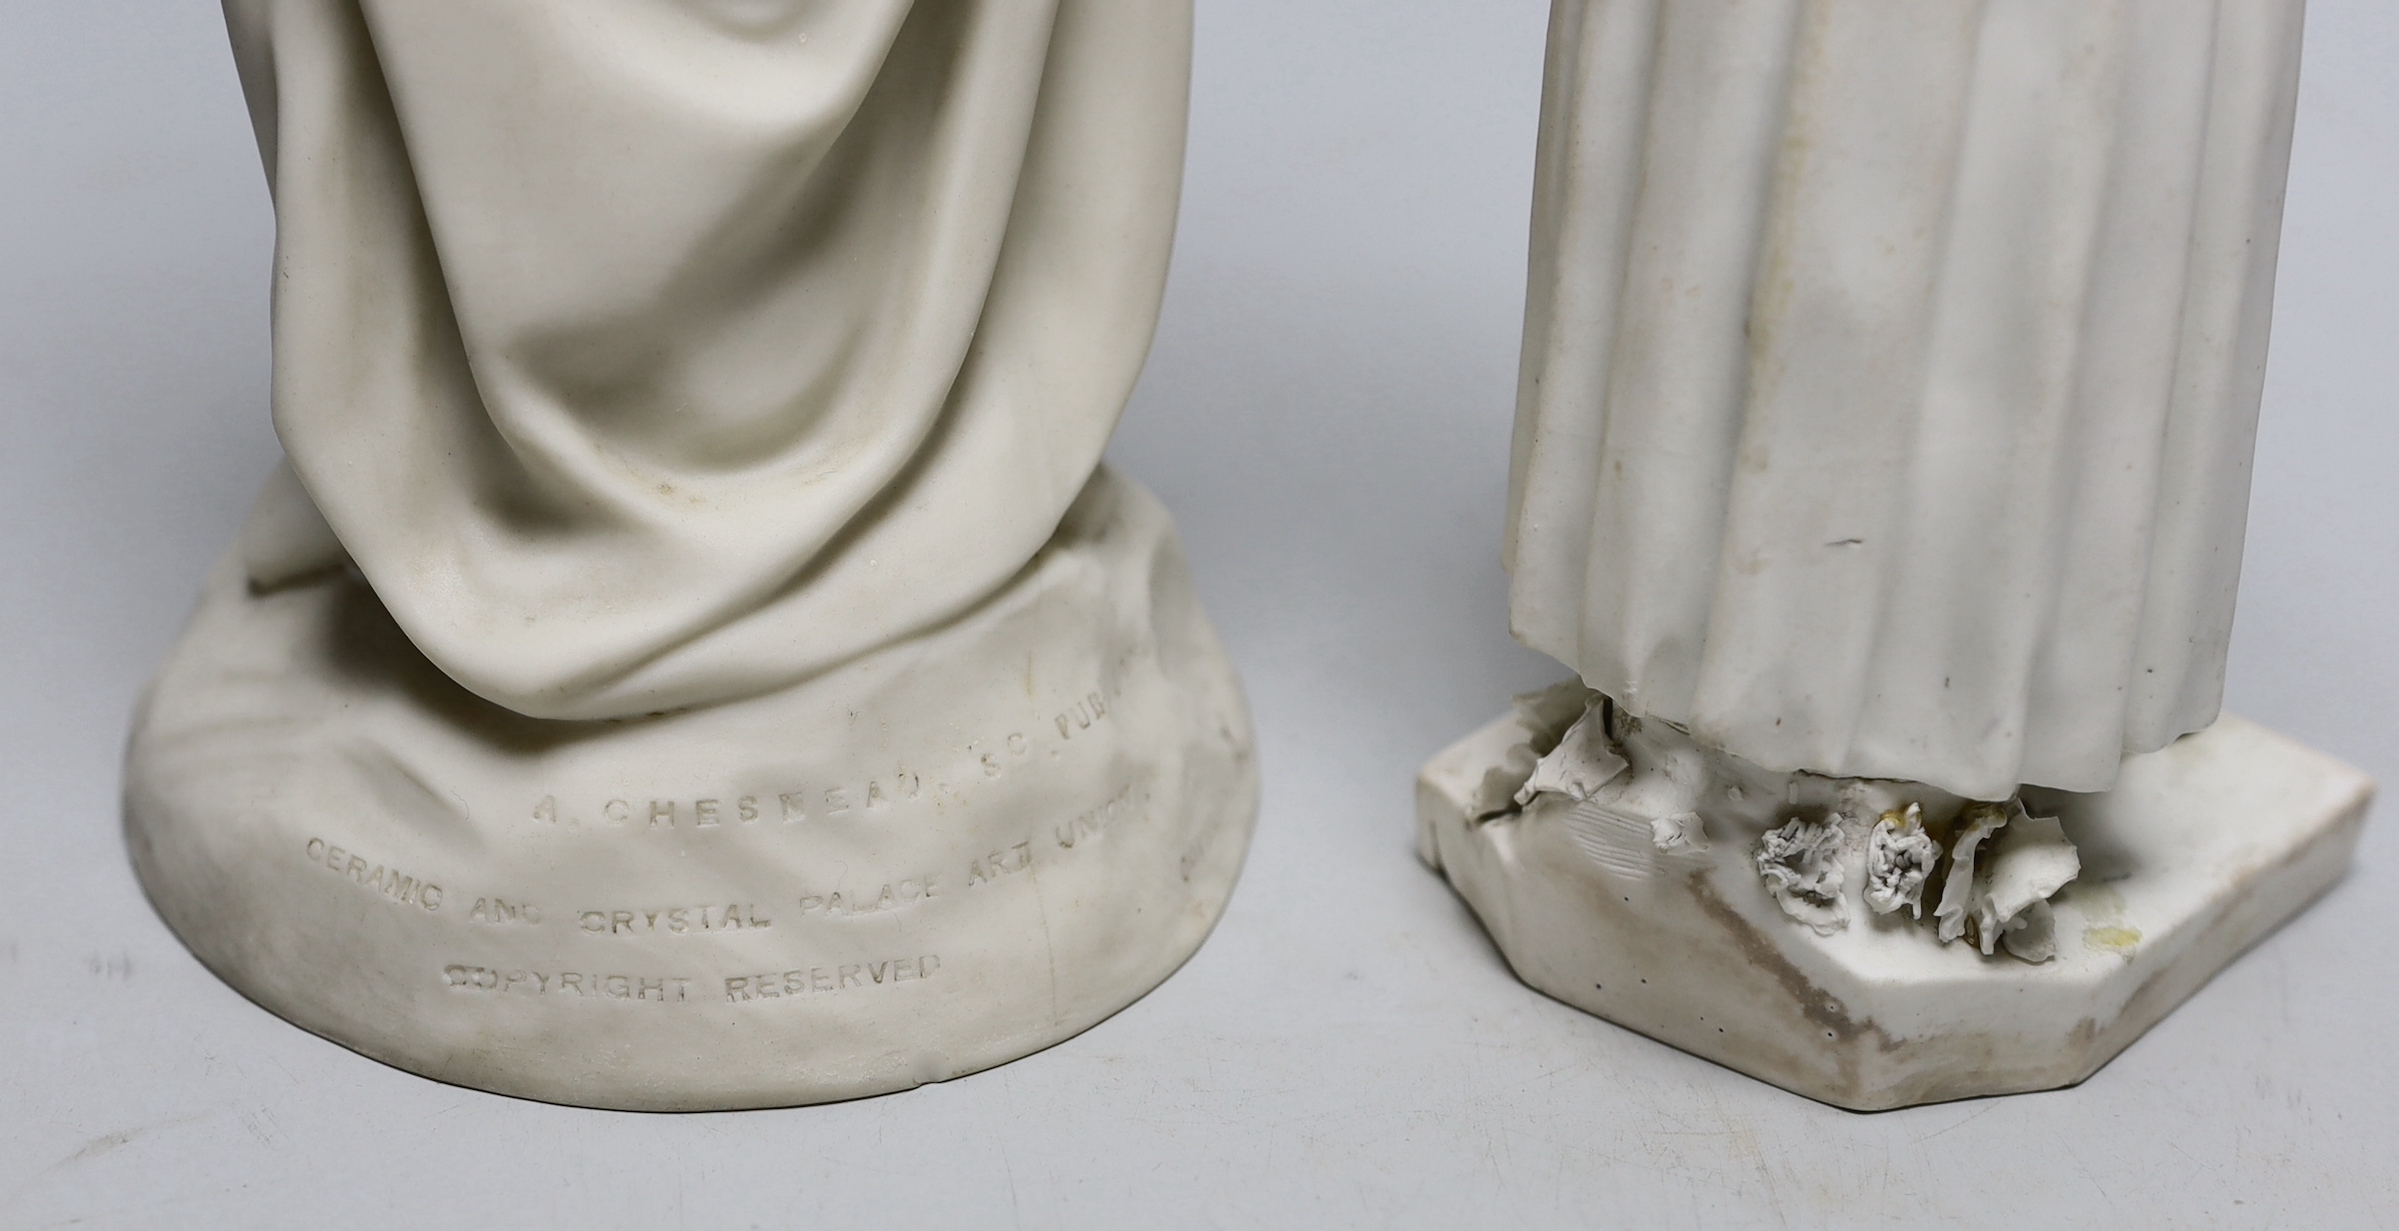 A Derby biscuit figure of a female gardener, c.1780, and a Copeland Parian female figure, the largest 43cm high